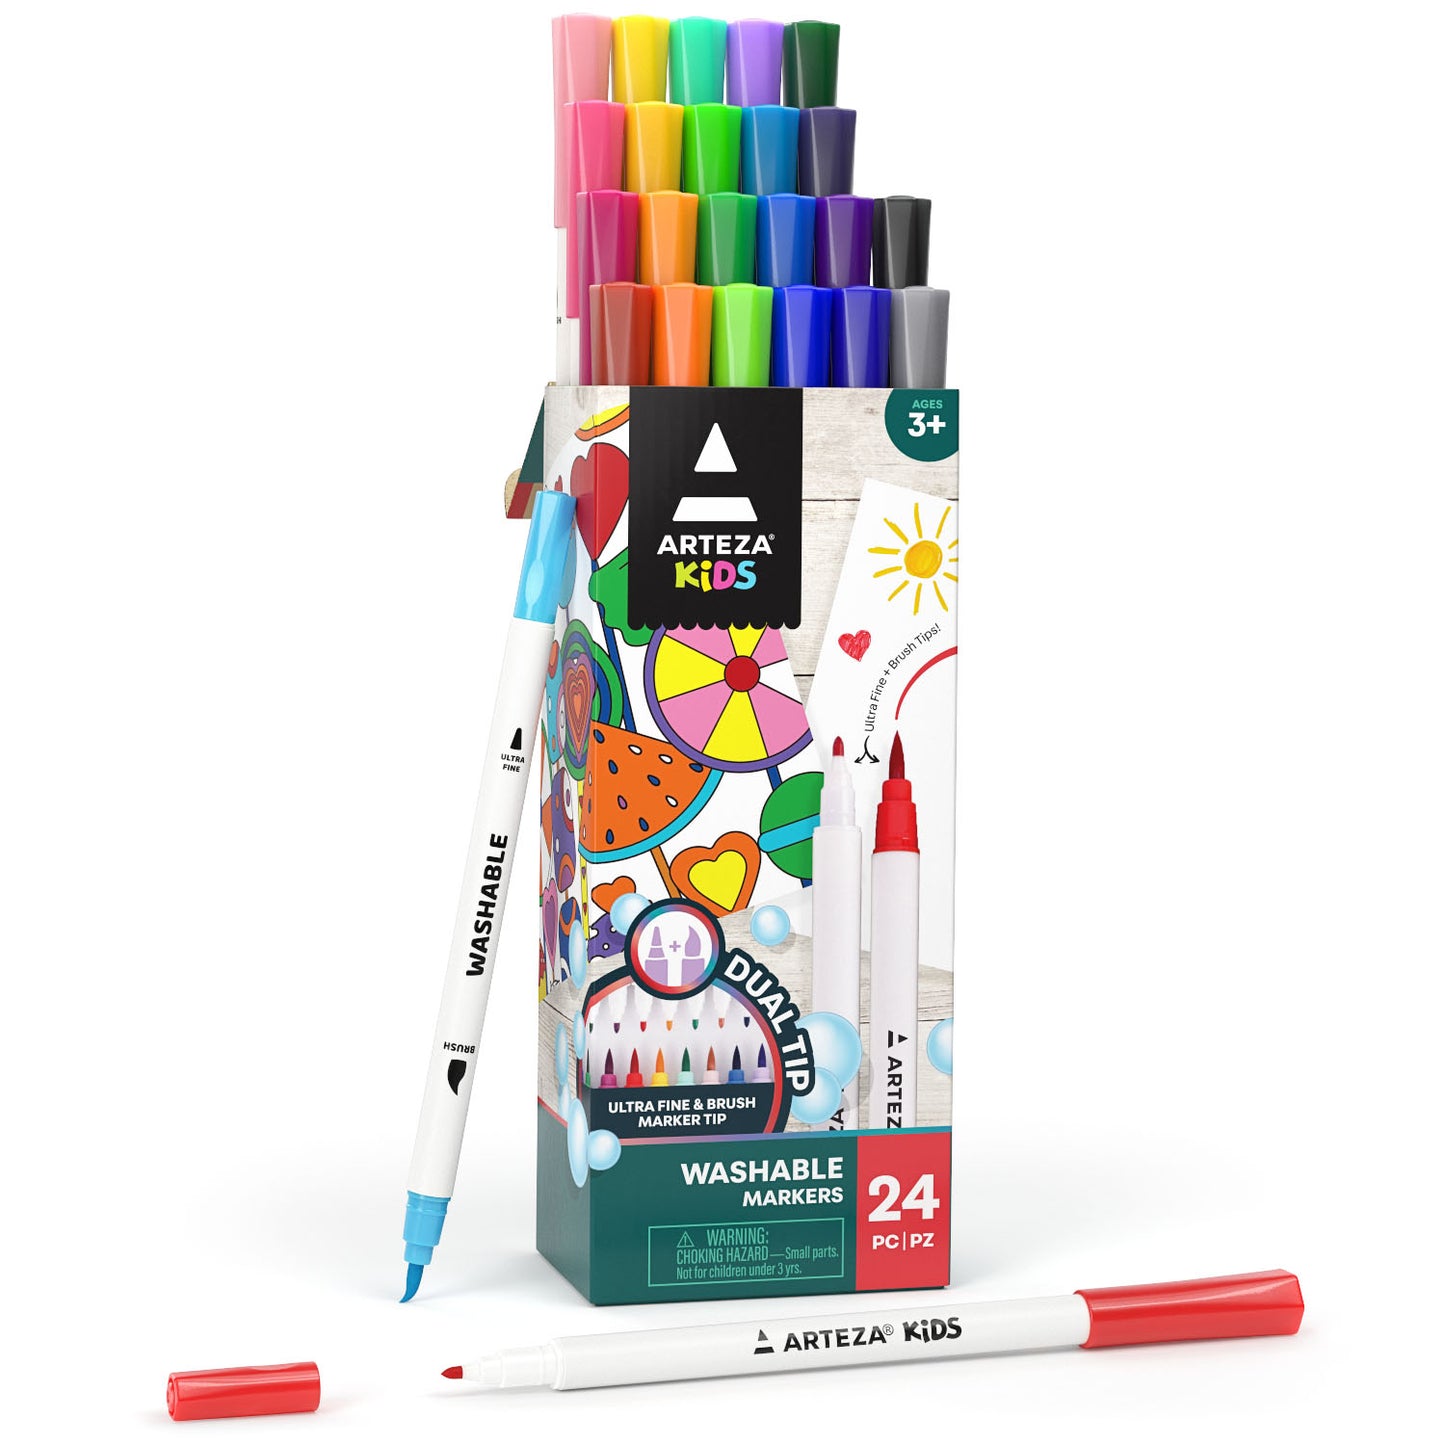 Arteza Dual Tip Sketch Markers Twimarkers Art Supply Set, Assorted Colors -  48 Pack : Target